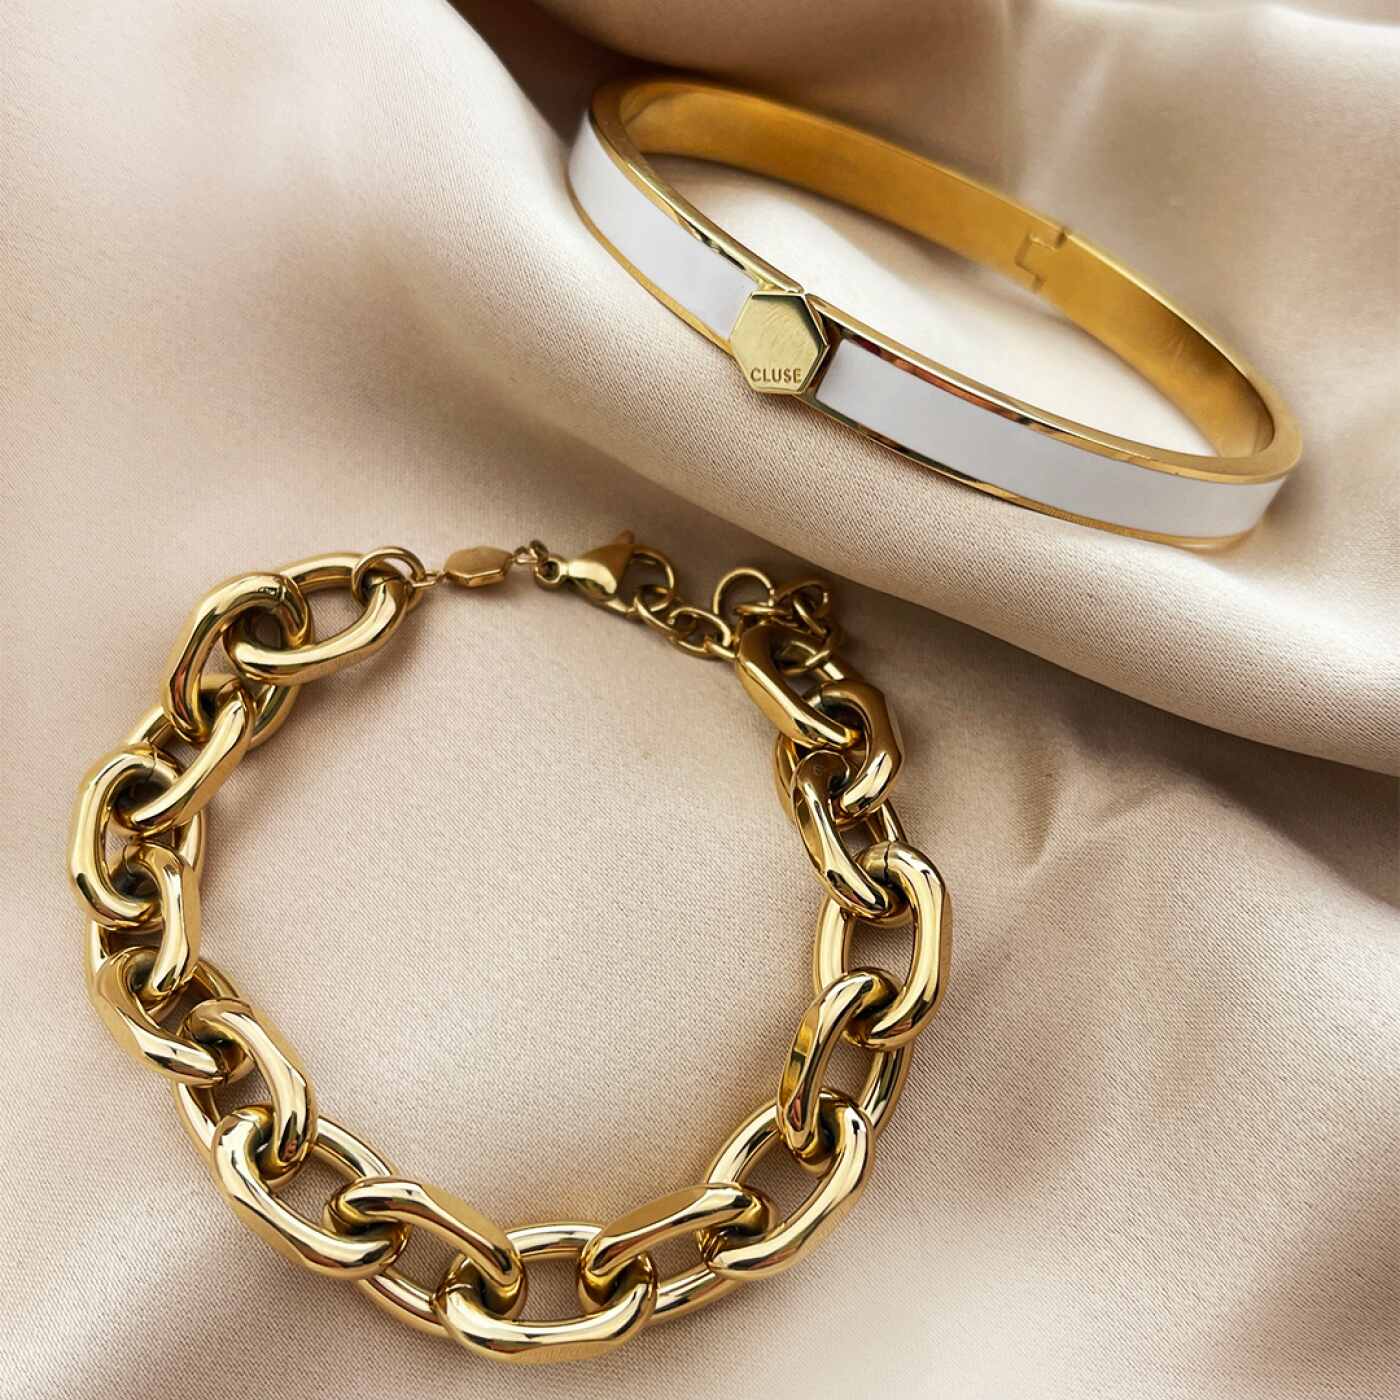 Gold Bracelets for Women - Lane Woods 14k Gold Plated Chunky Thick Large  Link Chain Bracelet, 7 Inch, Metal : Amazon.sg: Fashion